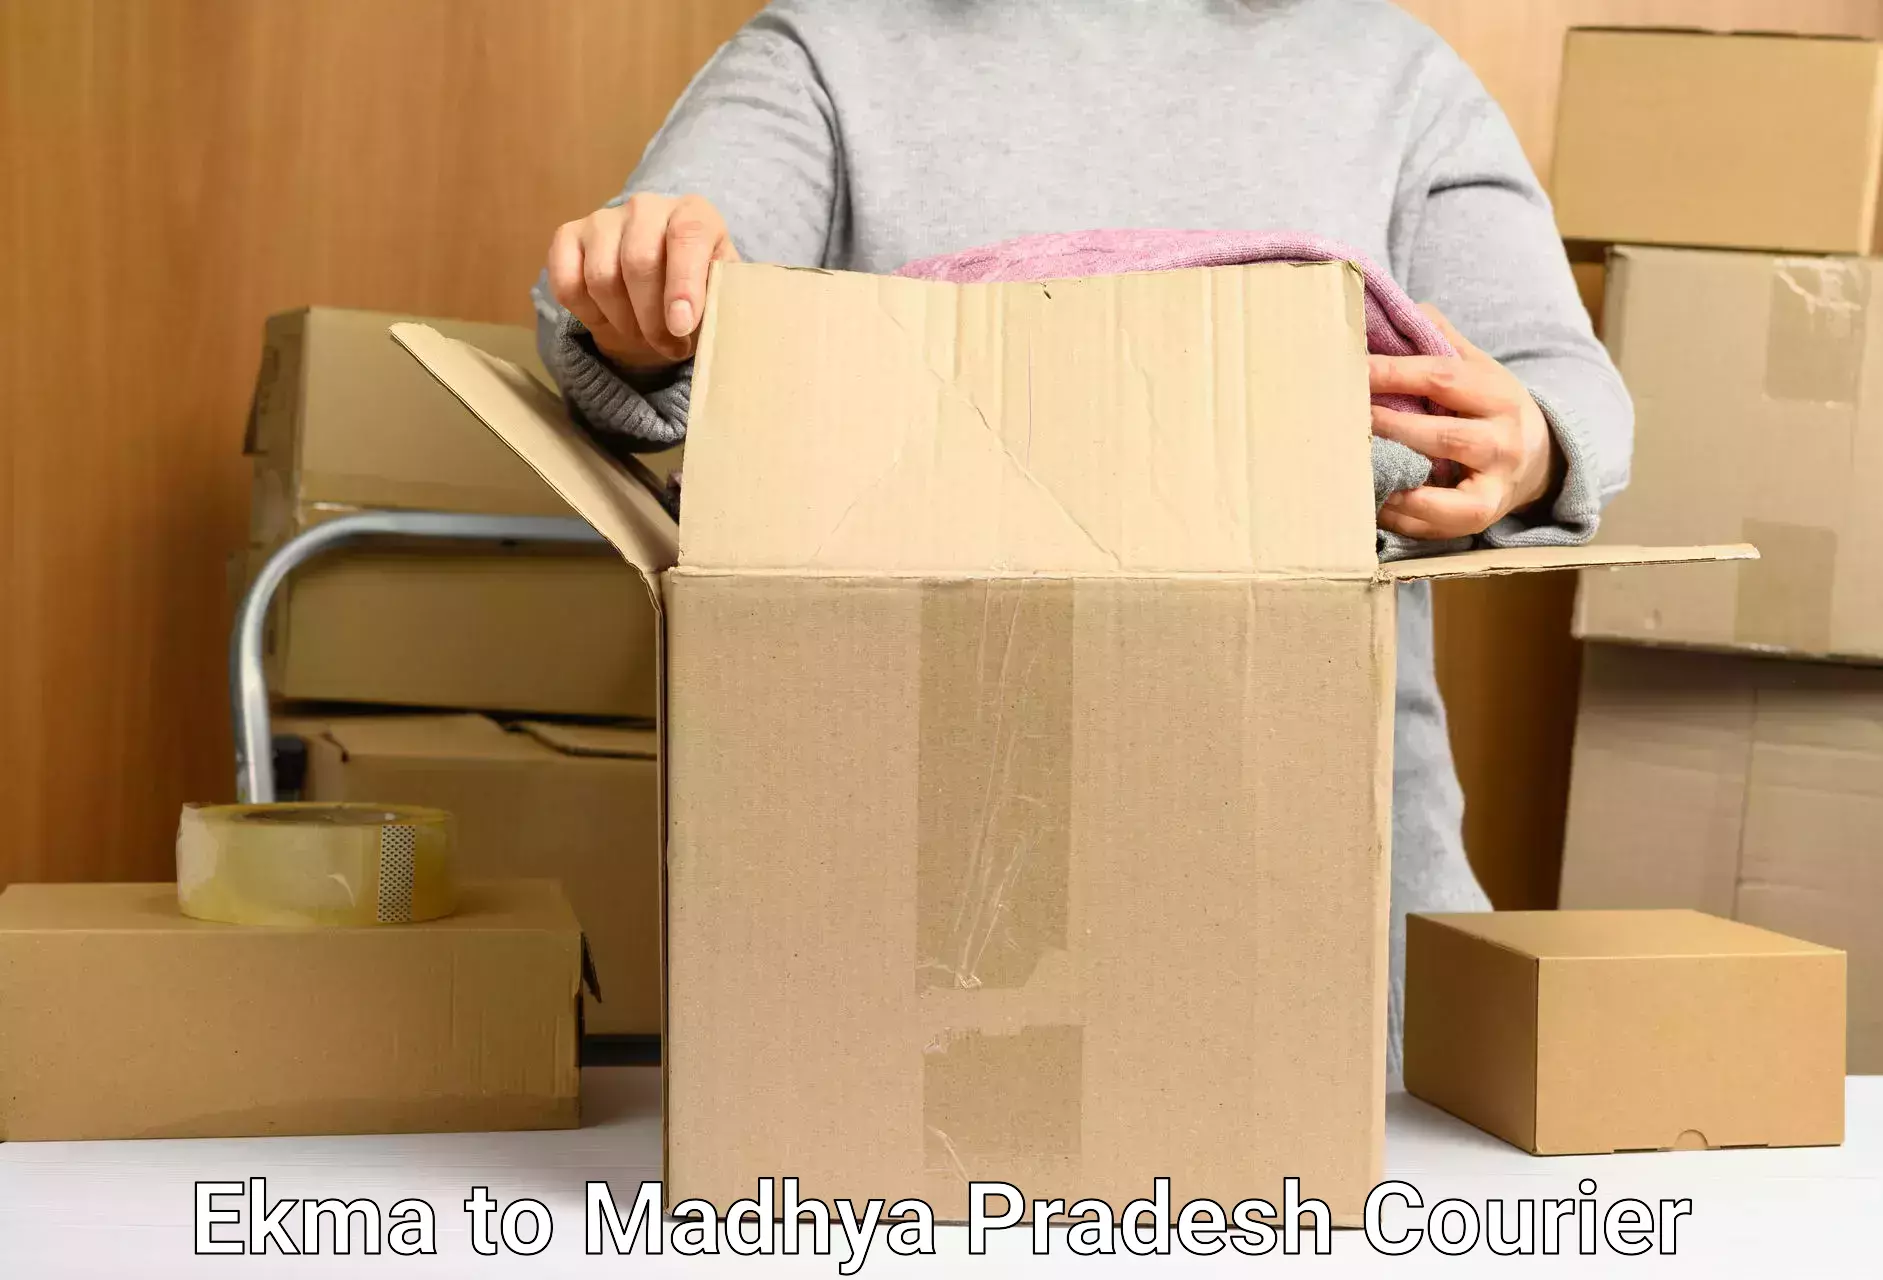 Personal courier services Ekma to Madhya Pradesh